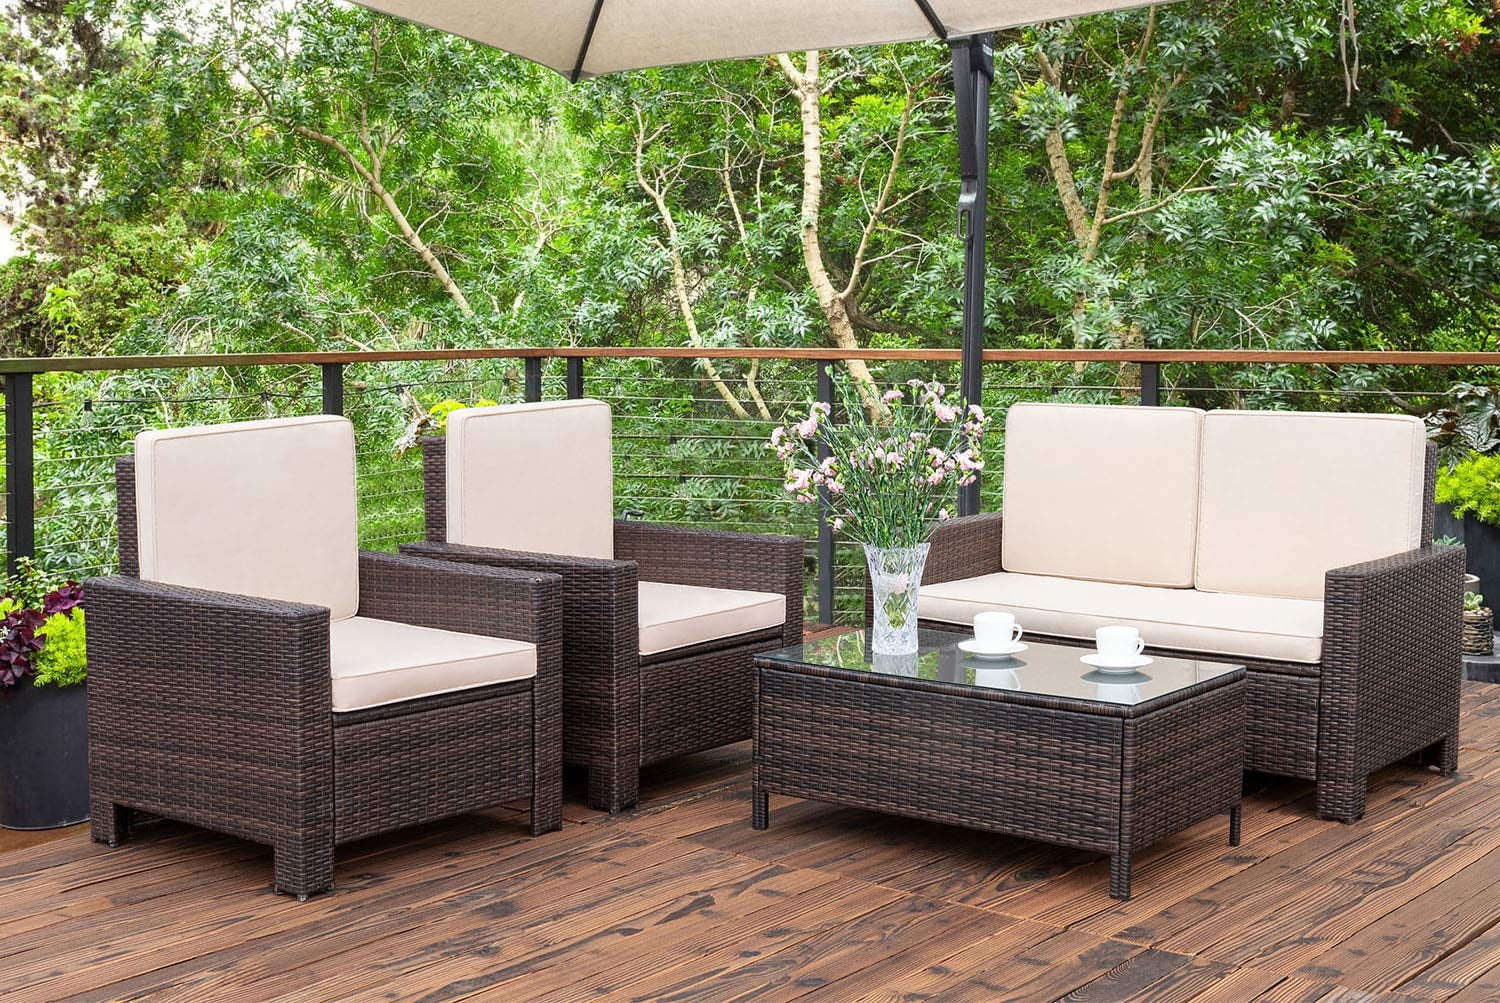 Walnew 4 Pieces Outdoor Patio Furniture Sets Rattan Chair ...